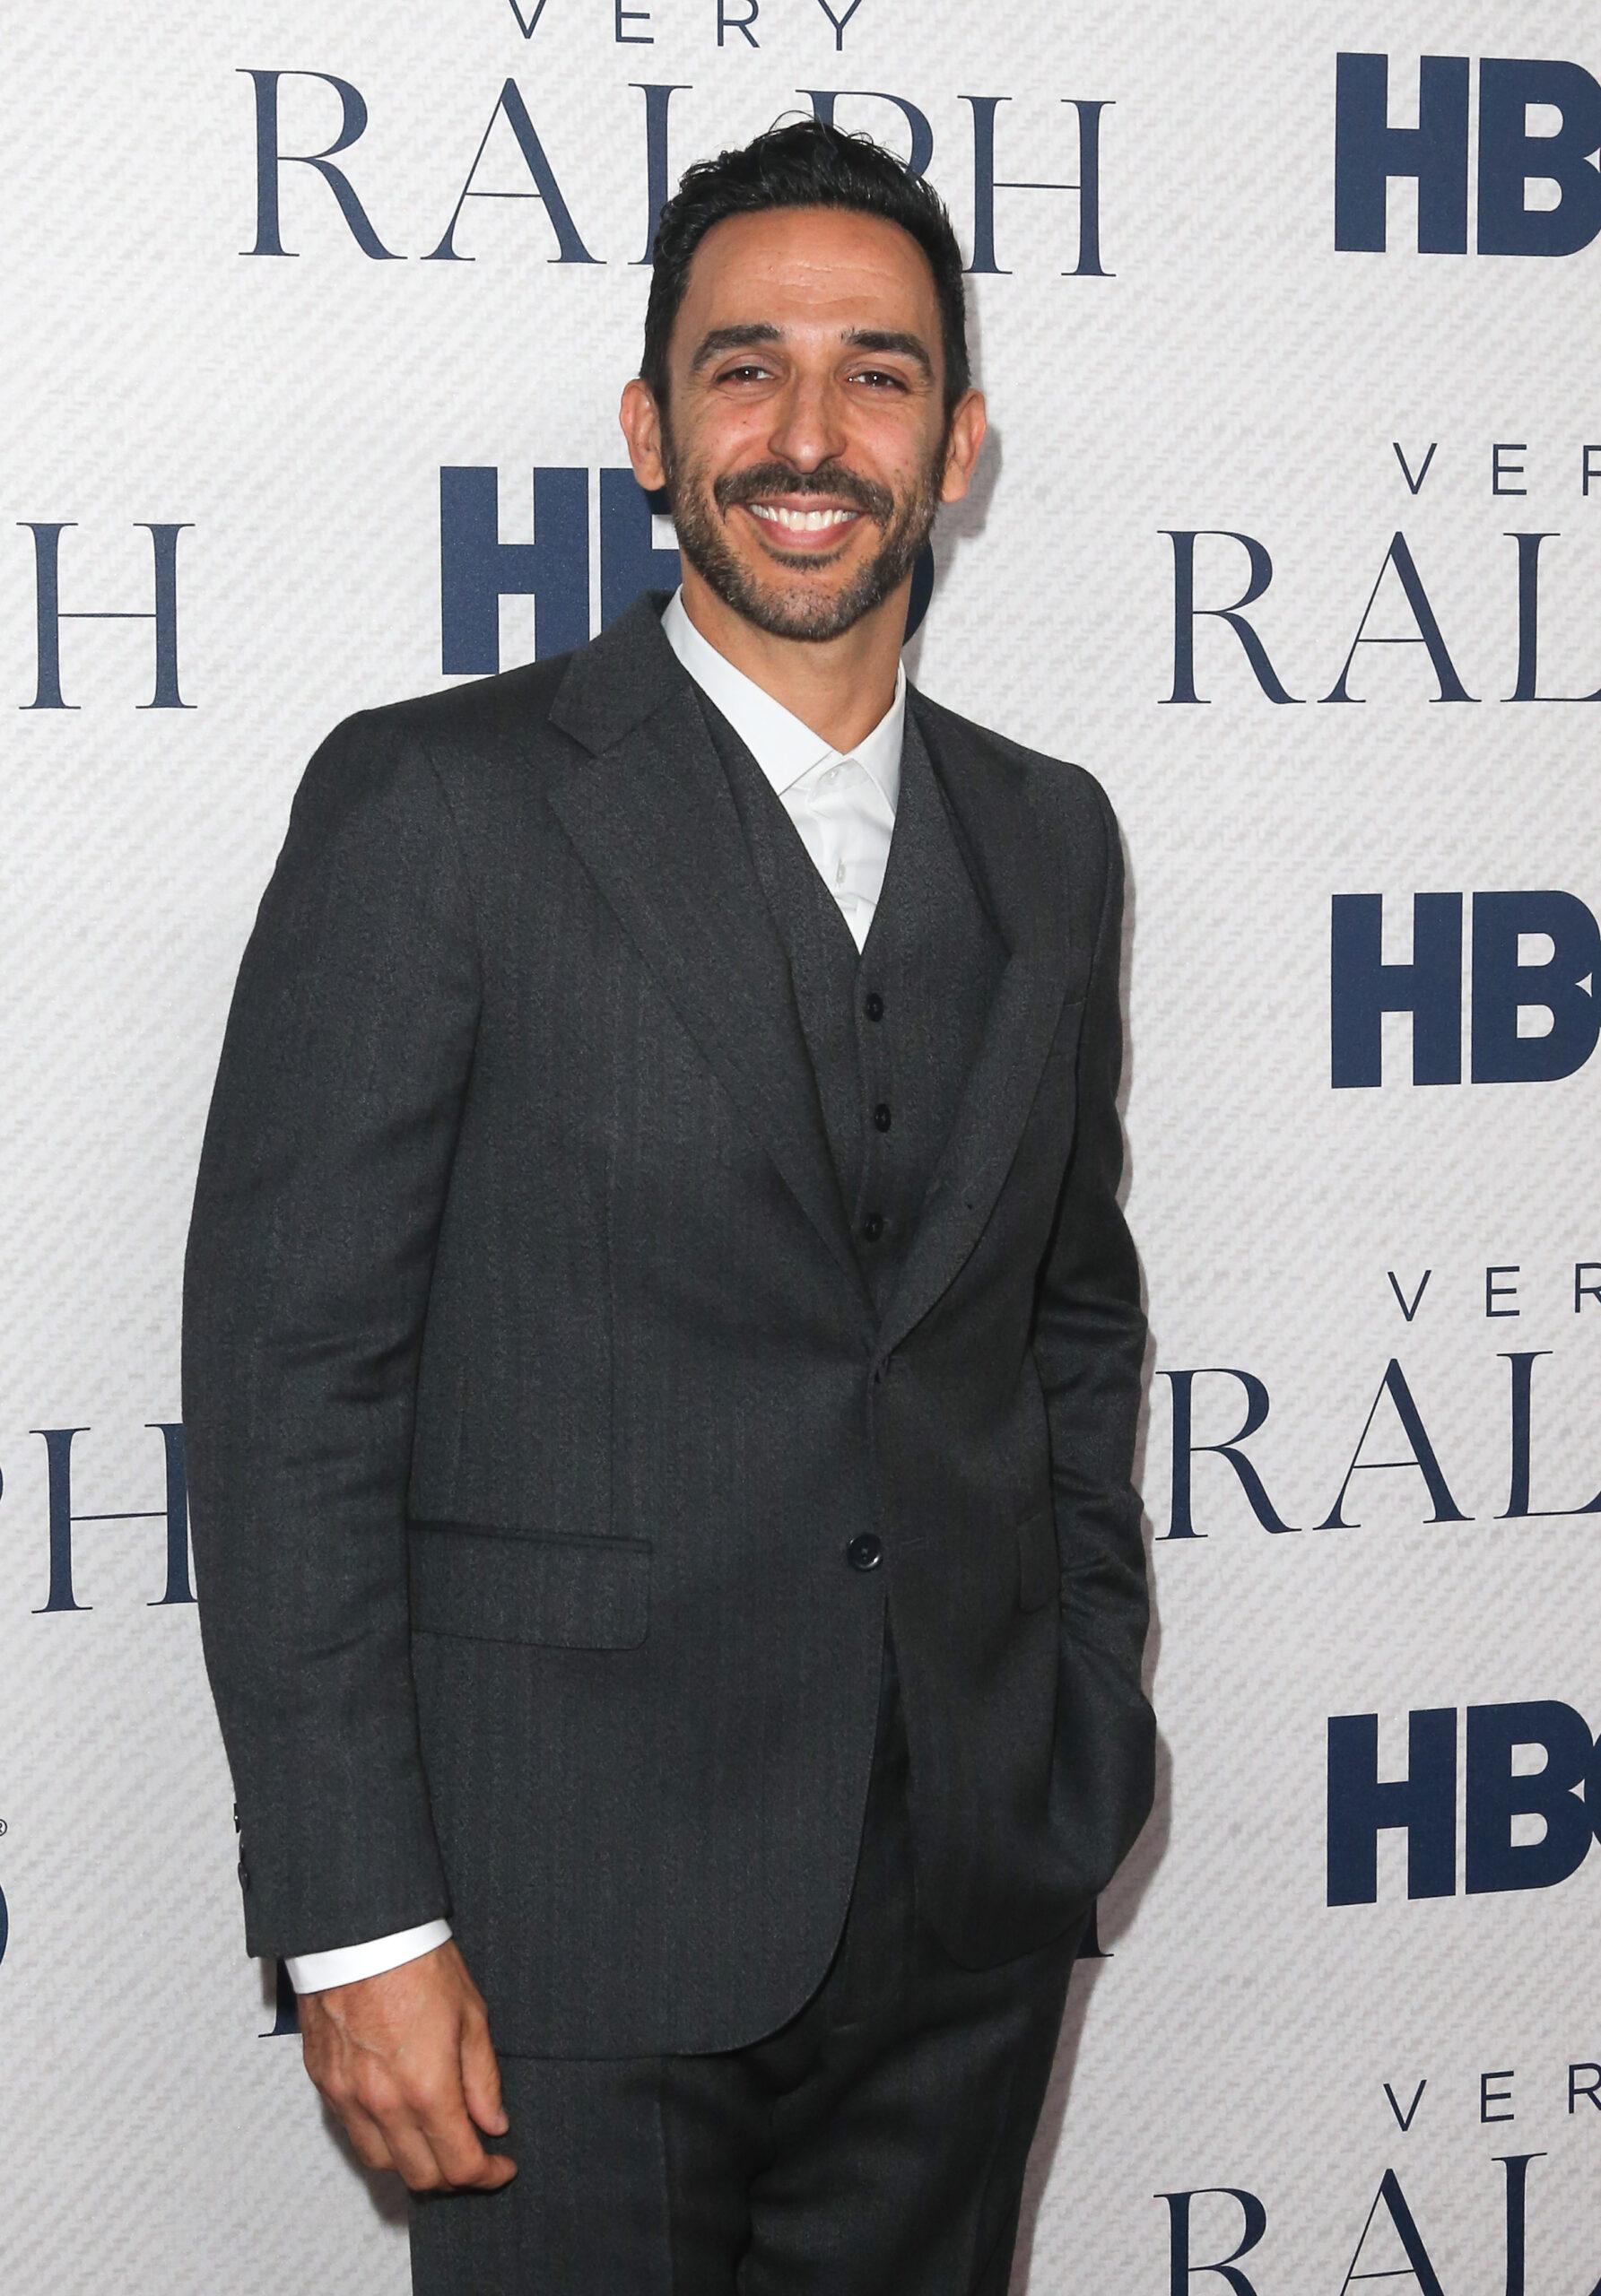 Amir Arison in a gray suit at HBO's 'Very Ralph' World Premiere